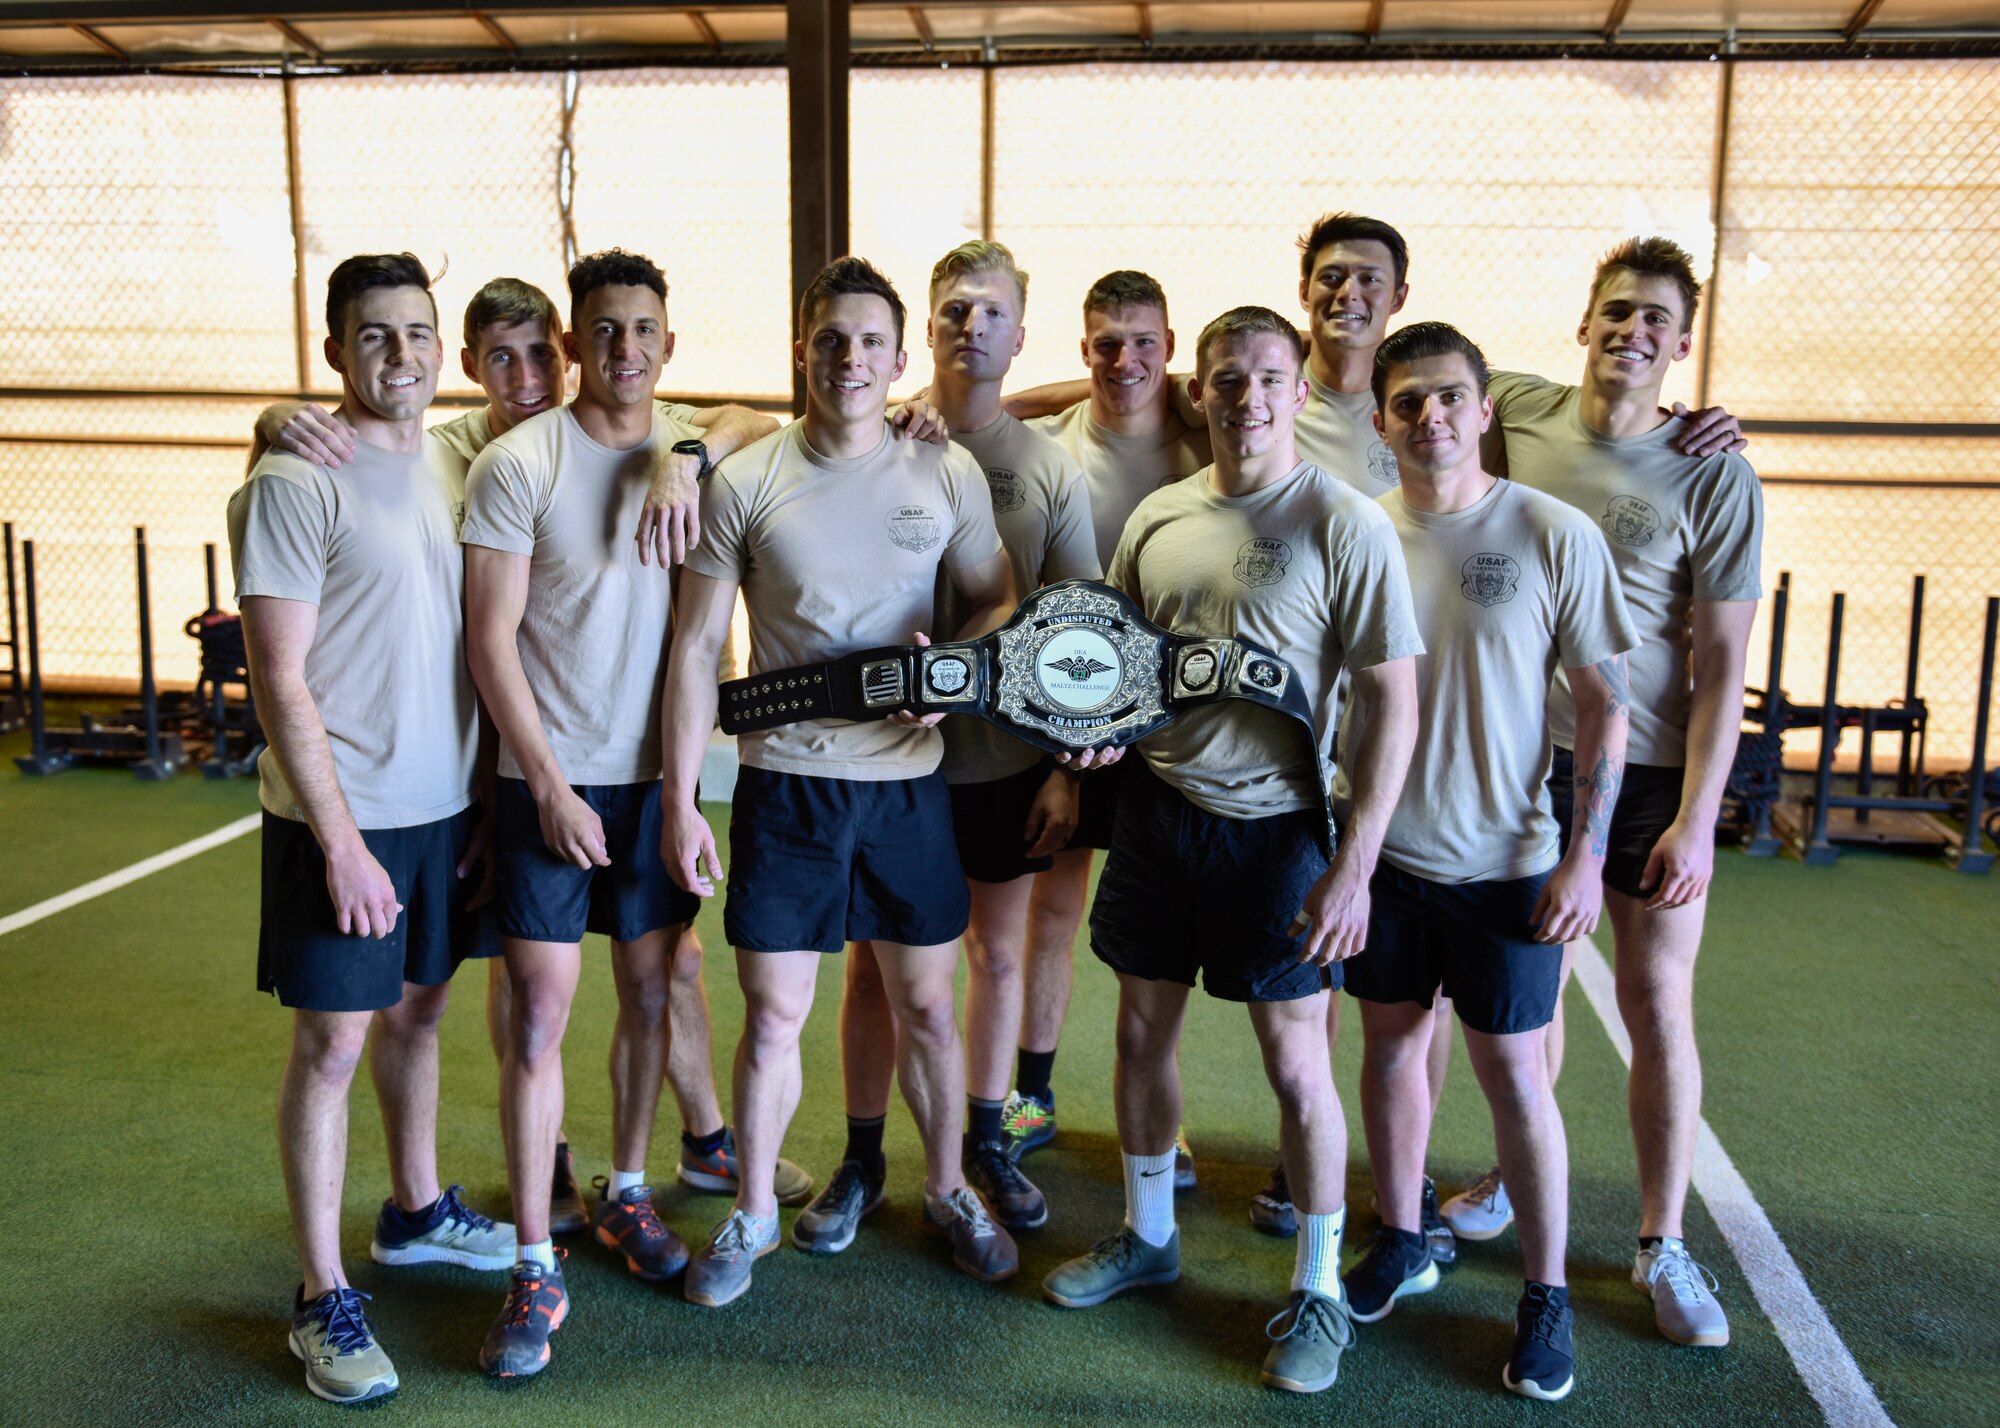 Members of the winning team from the Maltz Challenge pose for a photo at Kirtland Air Force Base, N.M., March 15, 2019. The winning team finished with an overall time of 20:16. (U.S. Air Force photo by Airman 1st Class Austin J. Prisbrey)